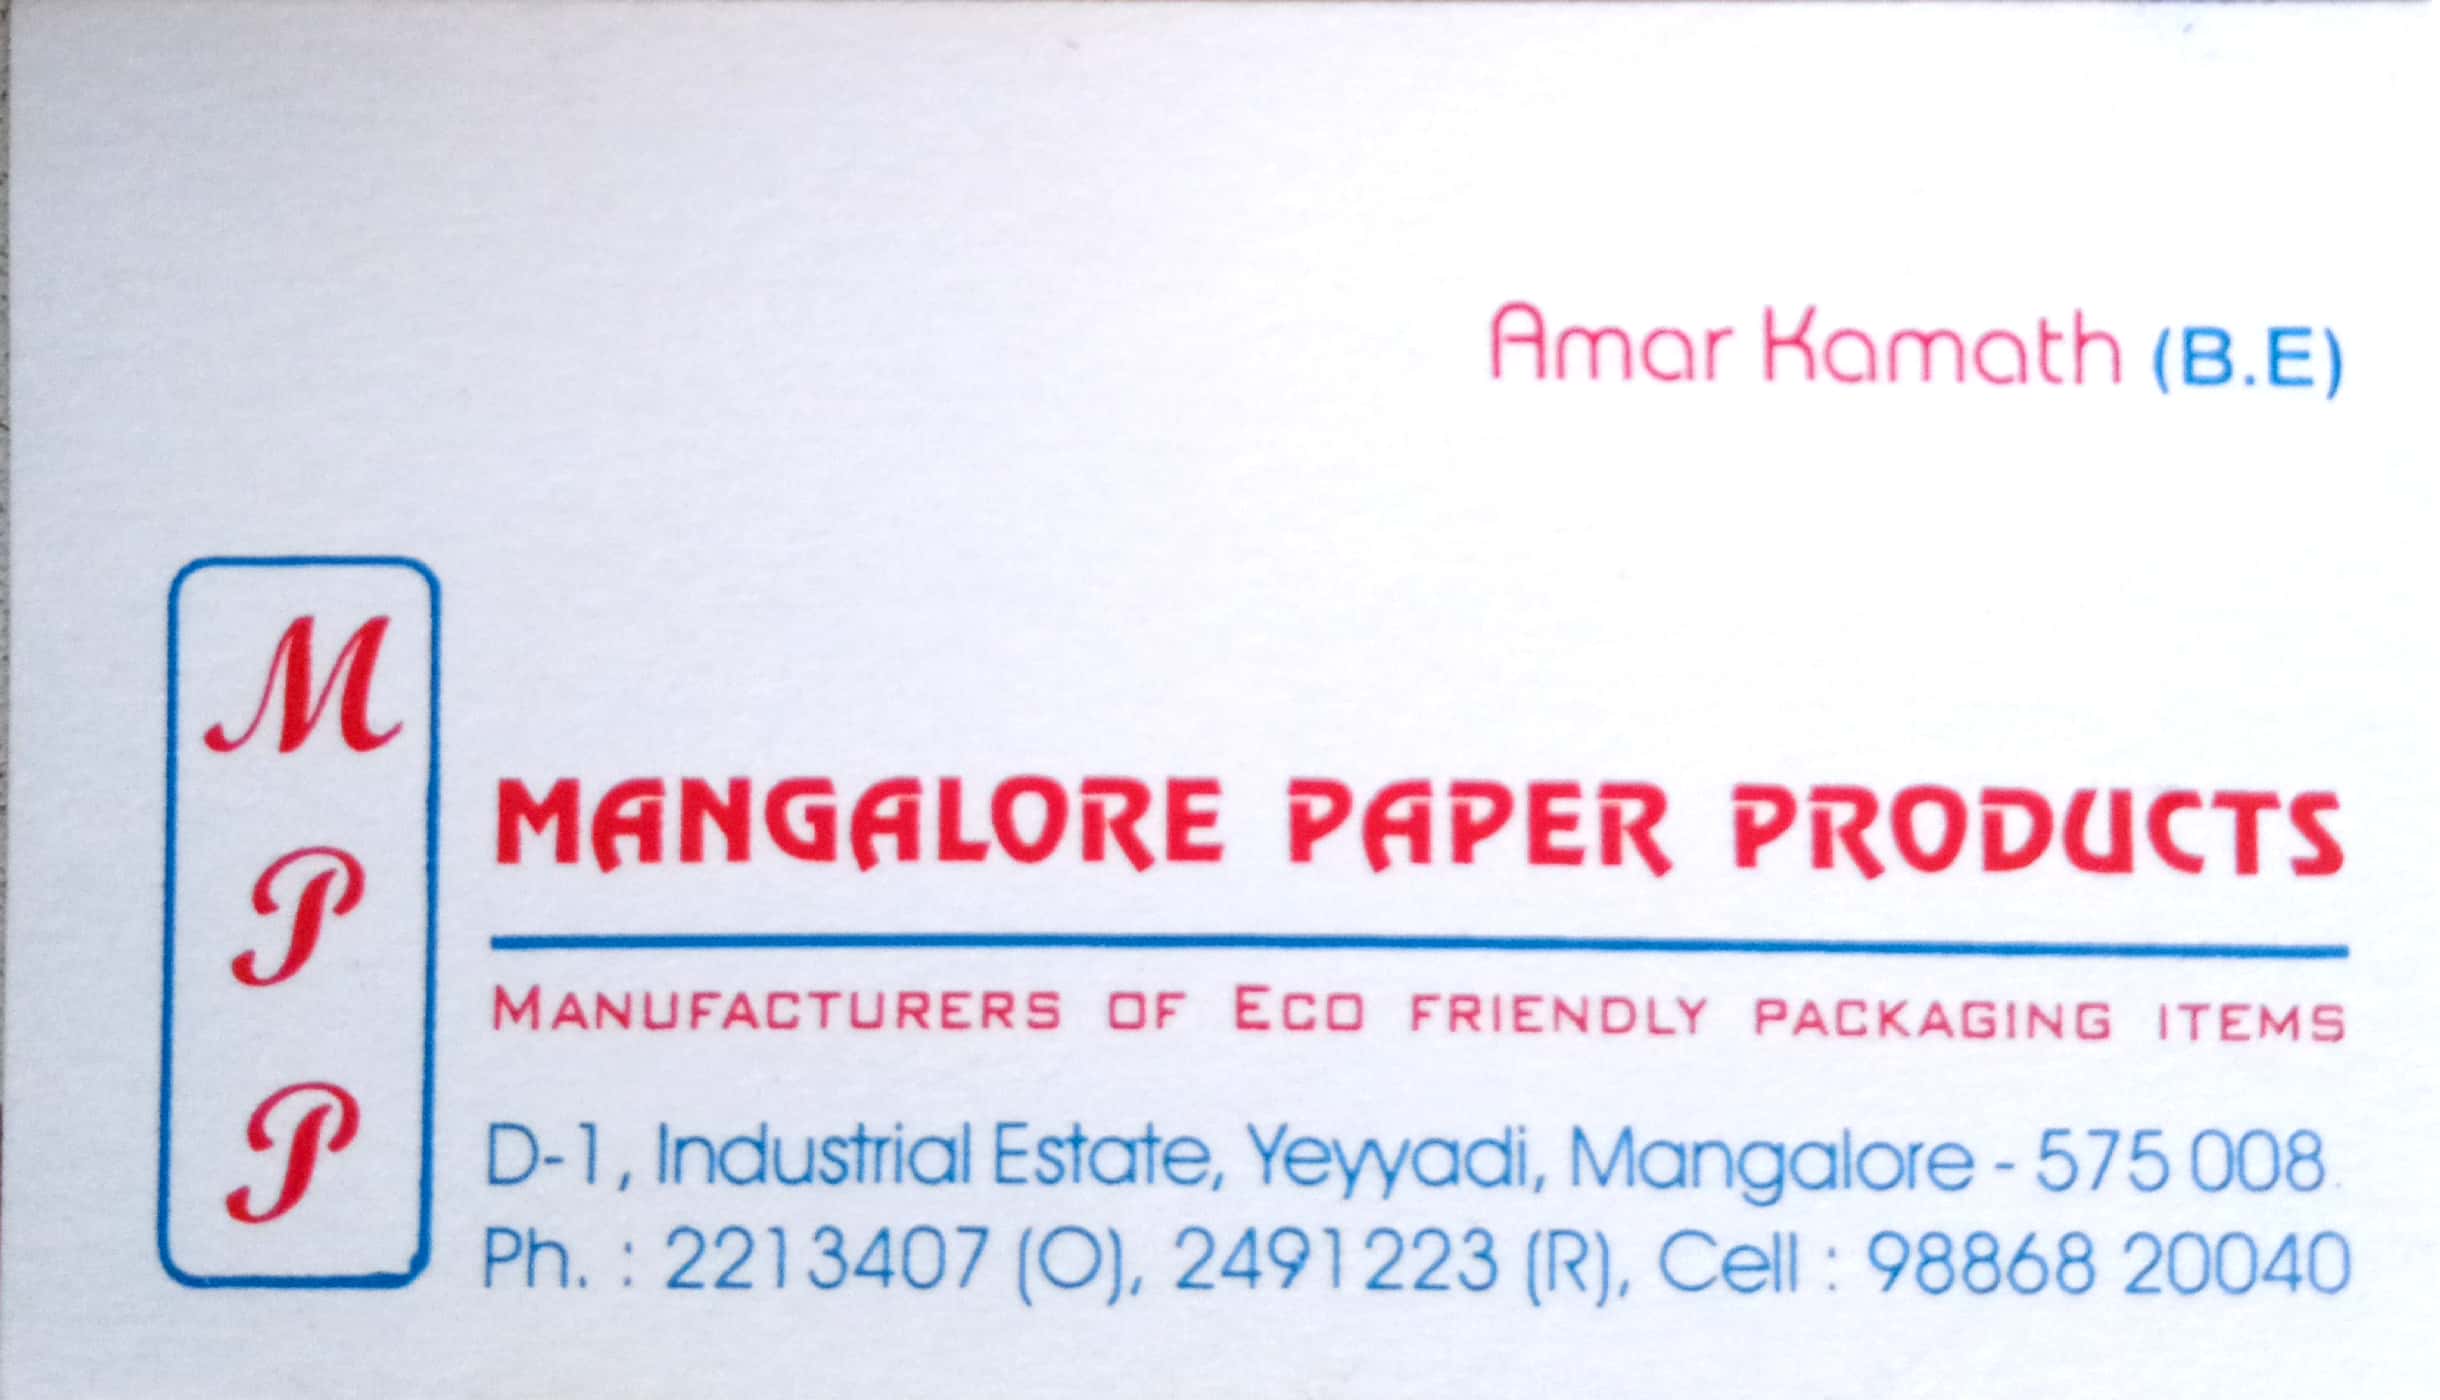 MANGALORE PAPER PRODUCTS